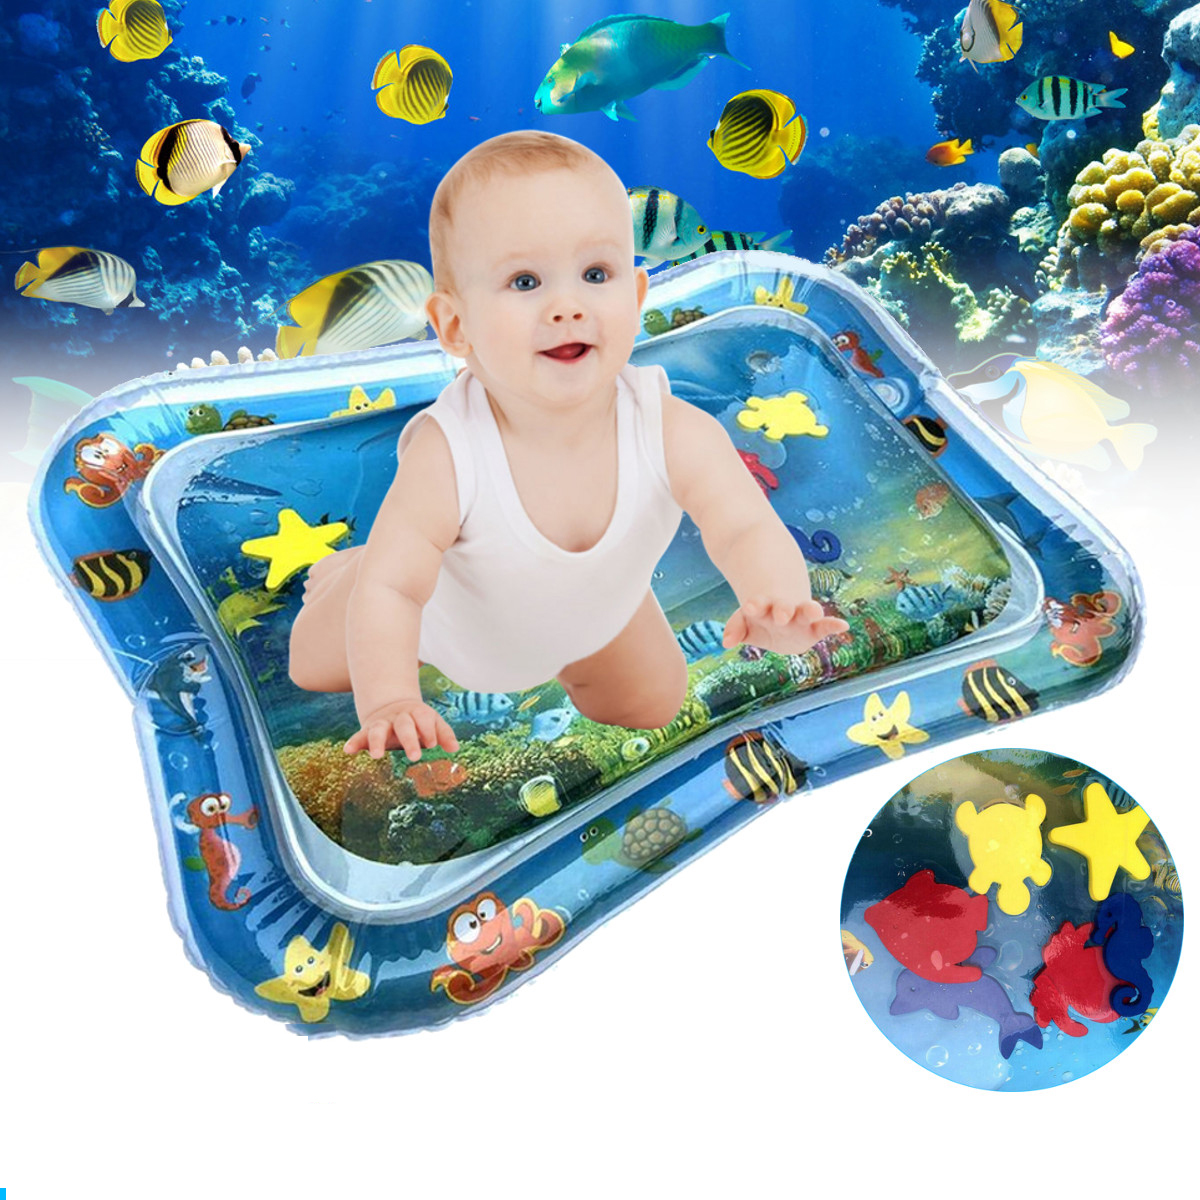 

66x50cm Inflatable Baby Water Play Mat Infants Swimming Air Mattress Toddlers Fun Tummy Time Activity Tools